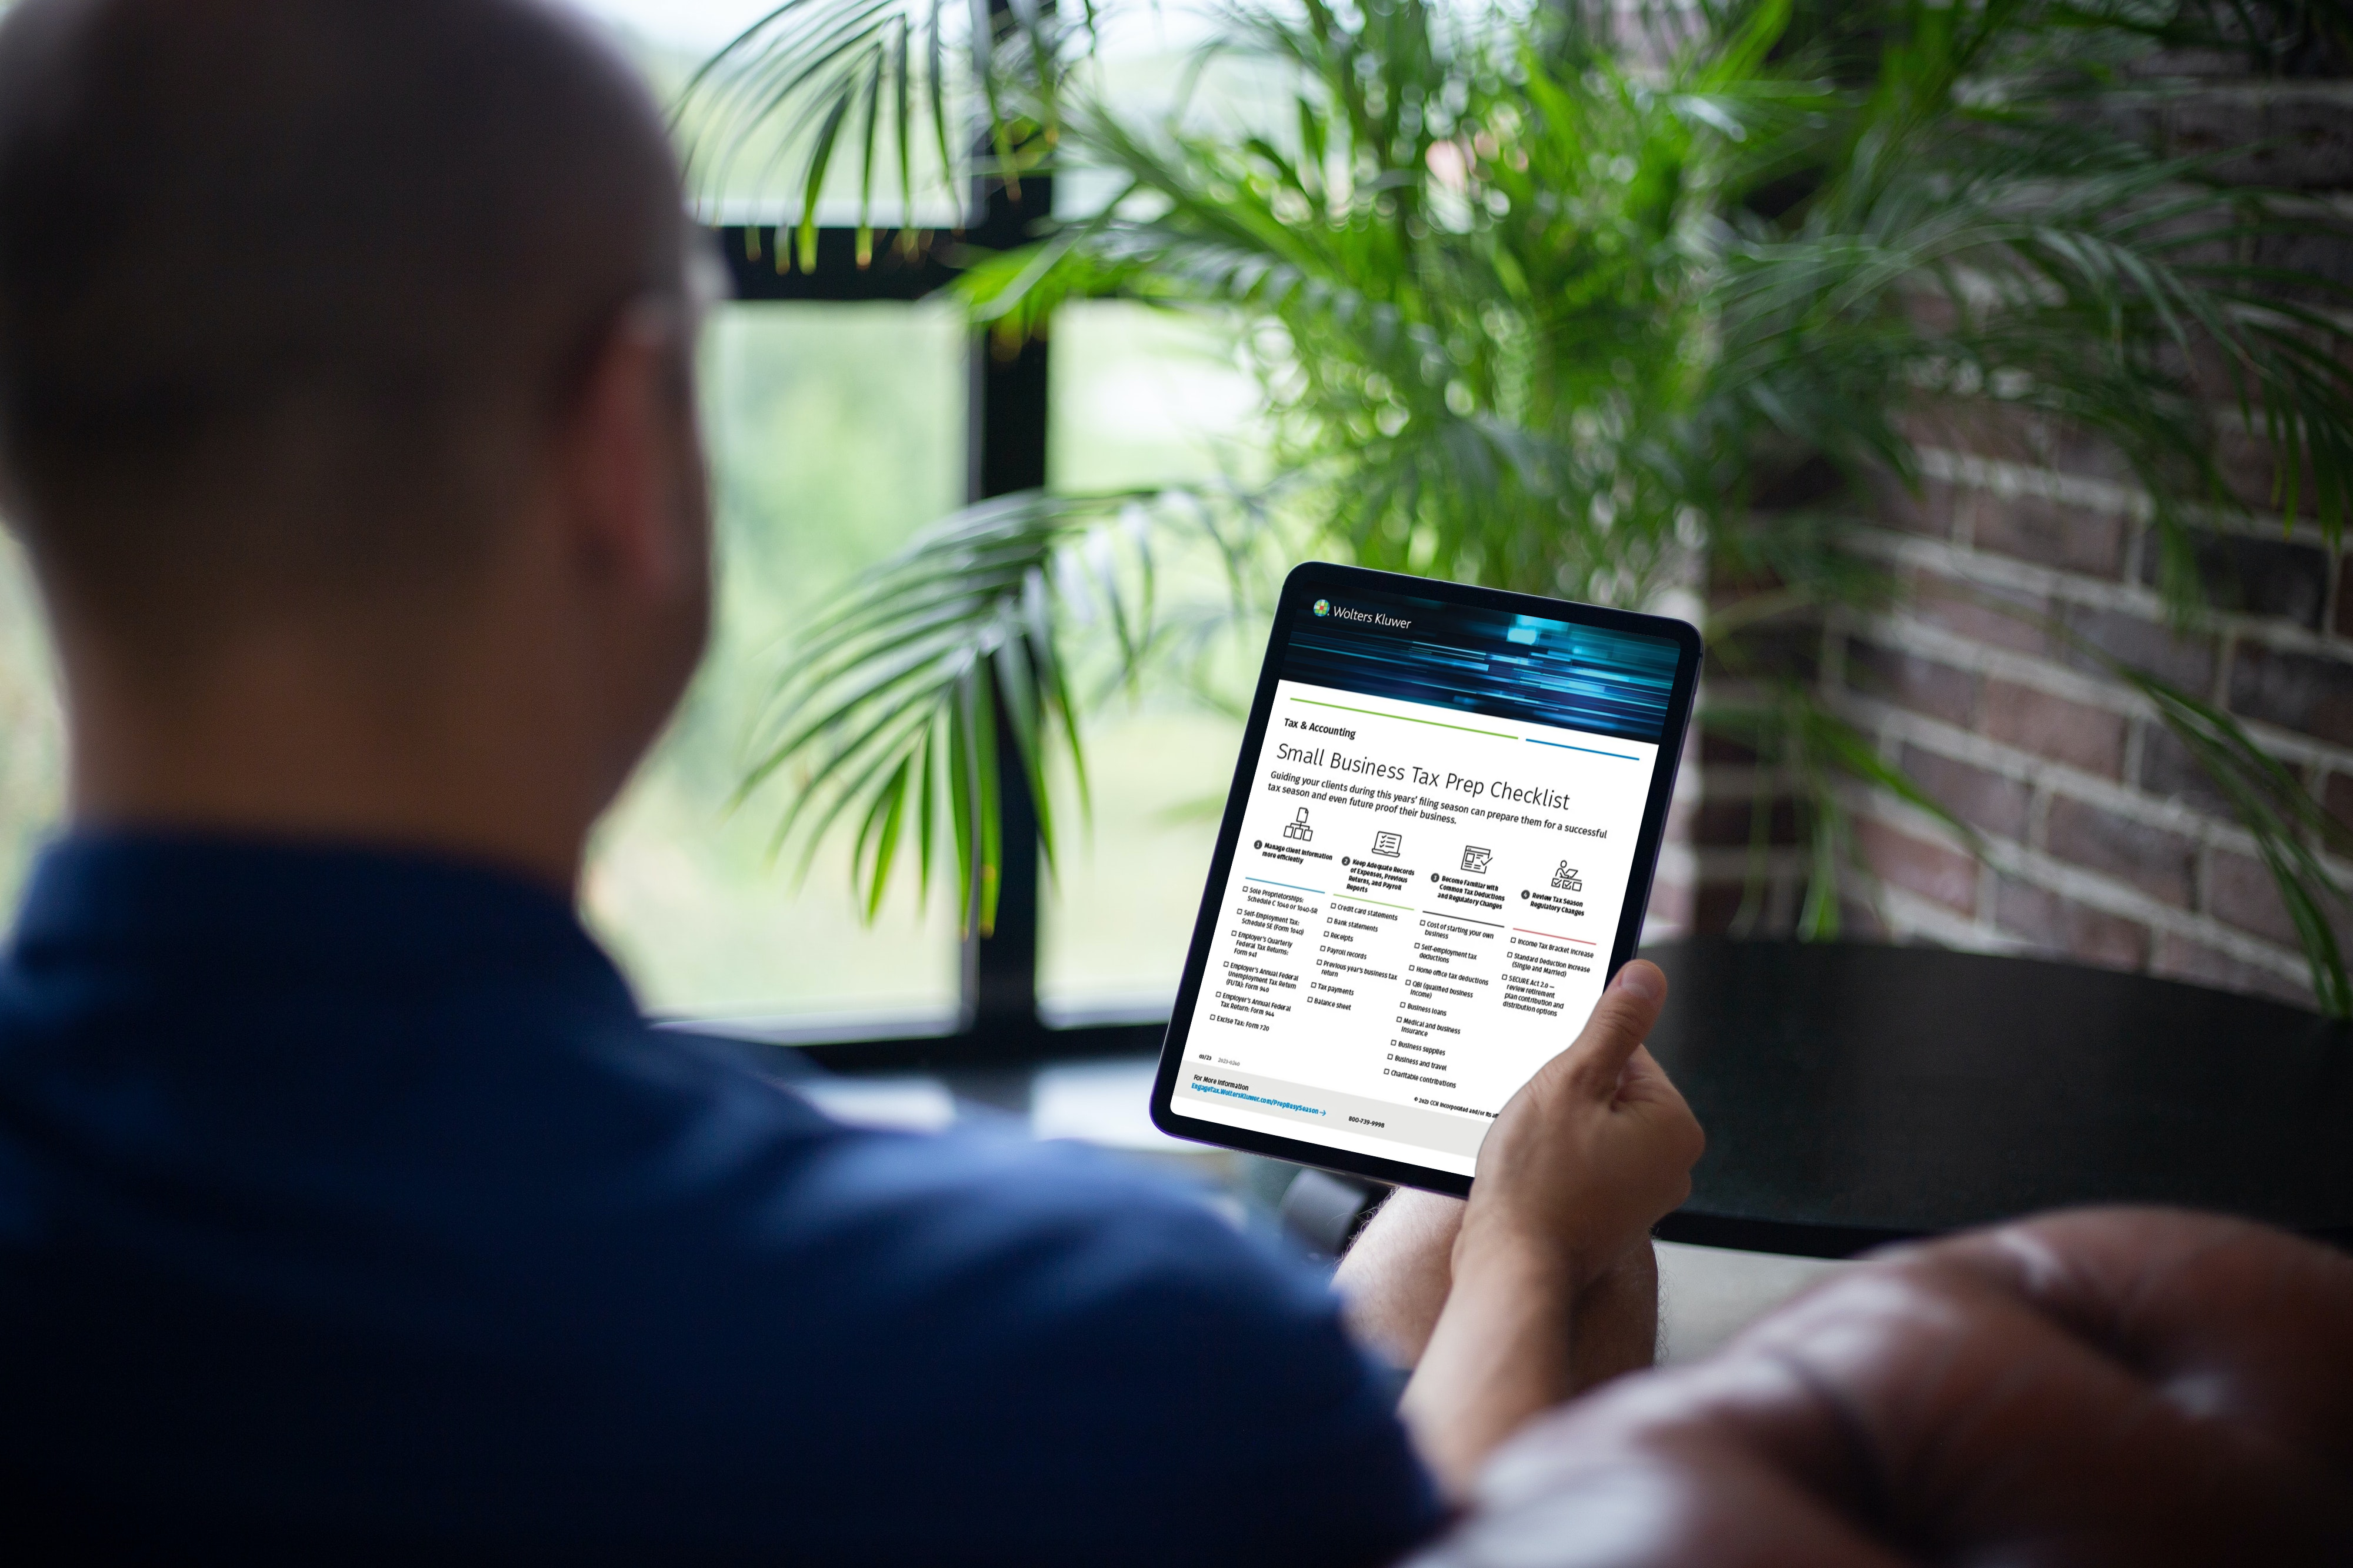 Man viewing Small Business Tax Prep Checklist on an iPad